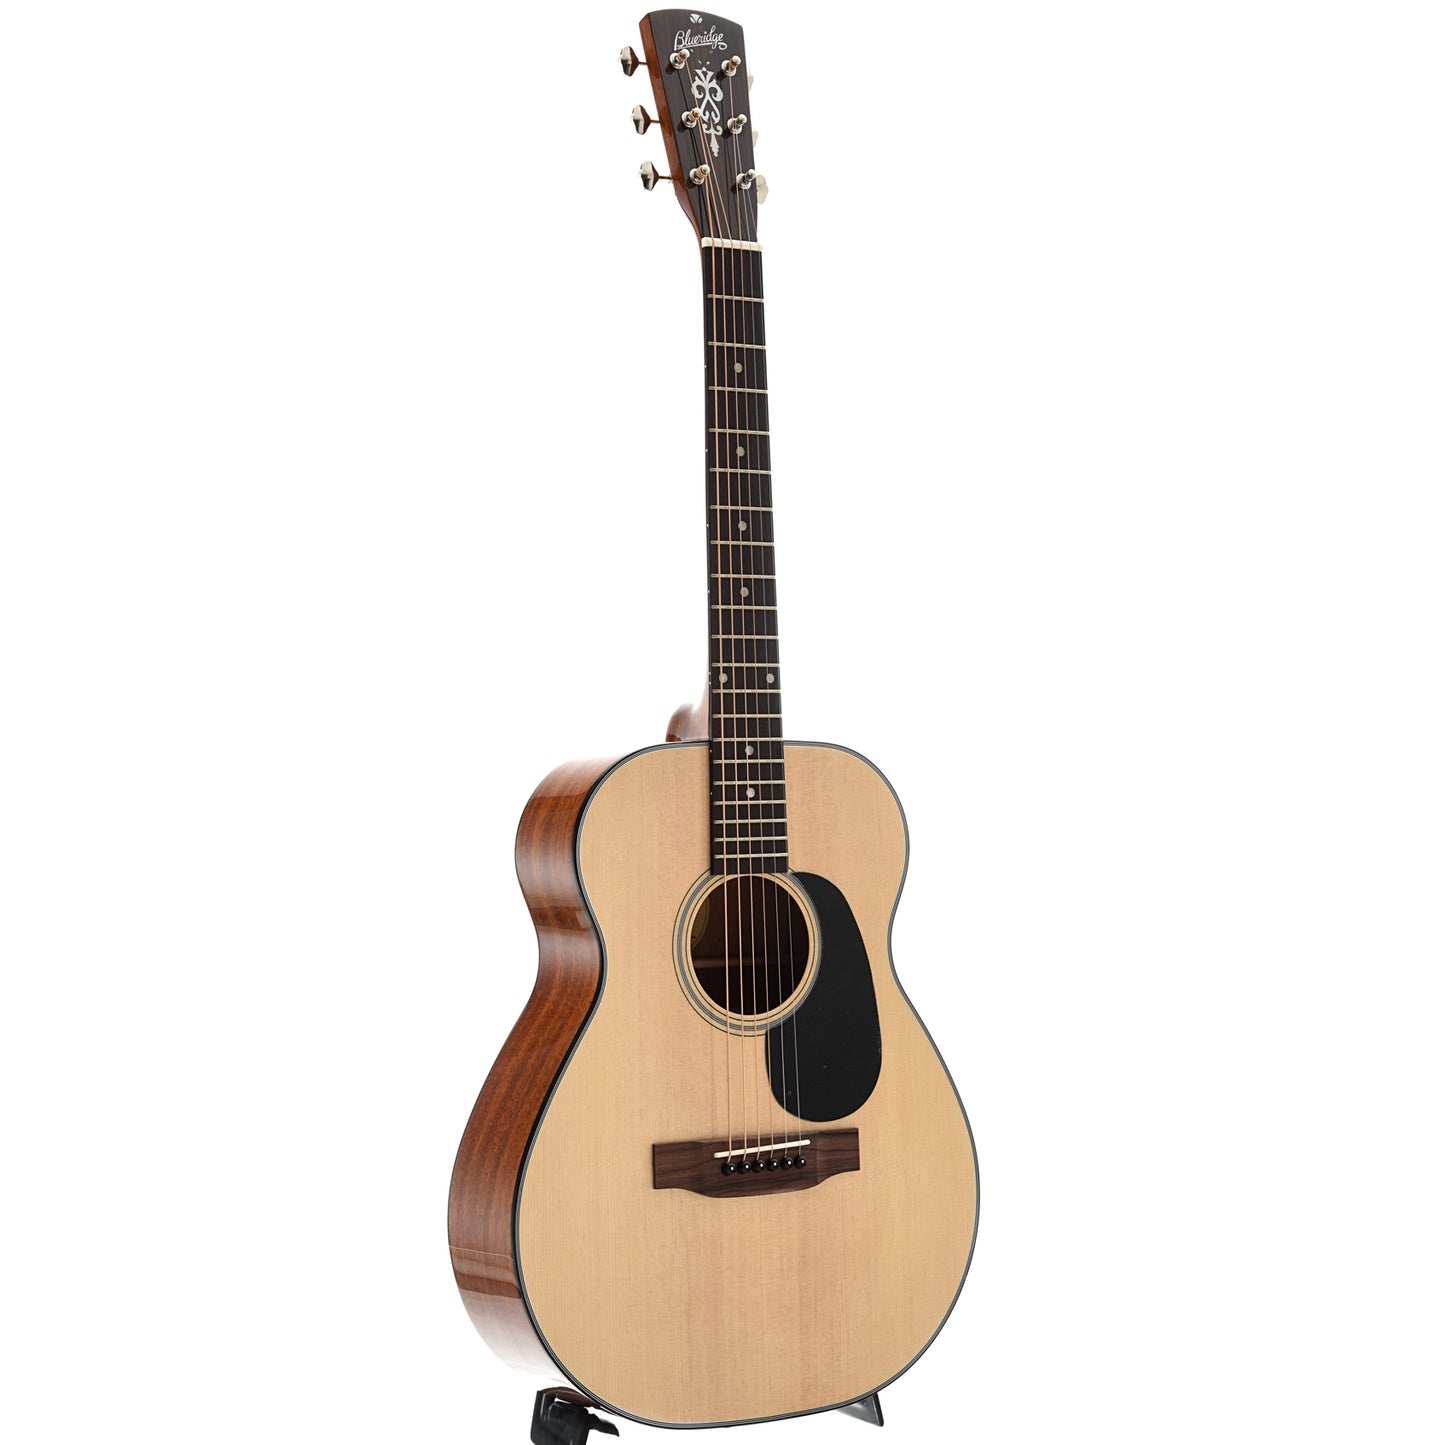 Image 1 of Blueridge Contemporary Series BR-41 "Baby" Acoustic Guitar- SKU# BR41 : Product Type Flat-top Guitars : Elderly Instruments